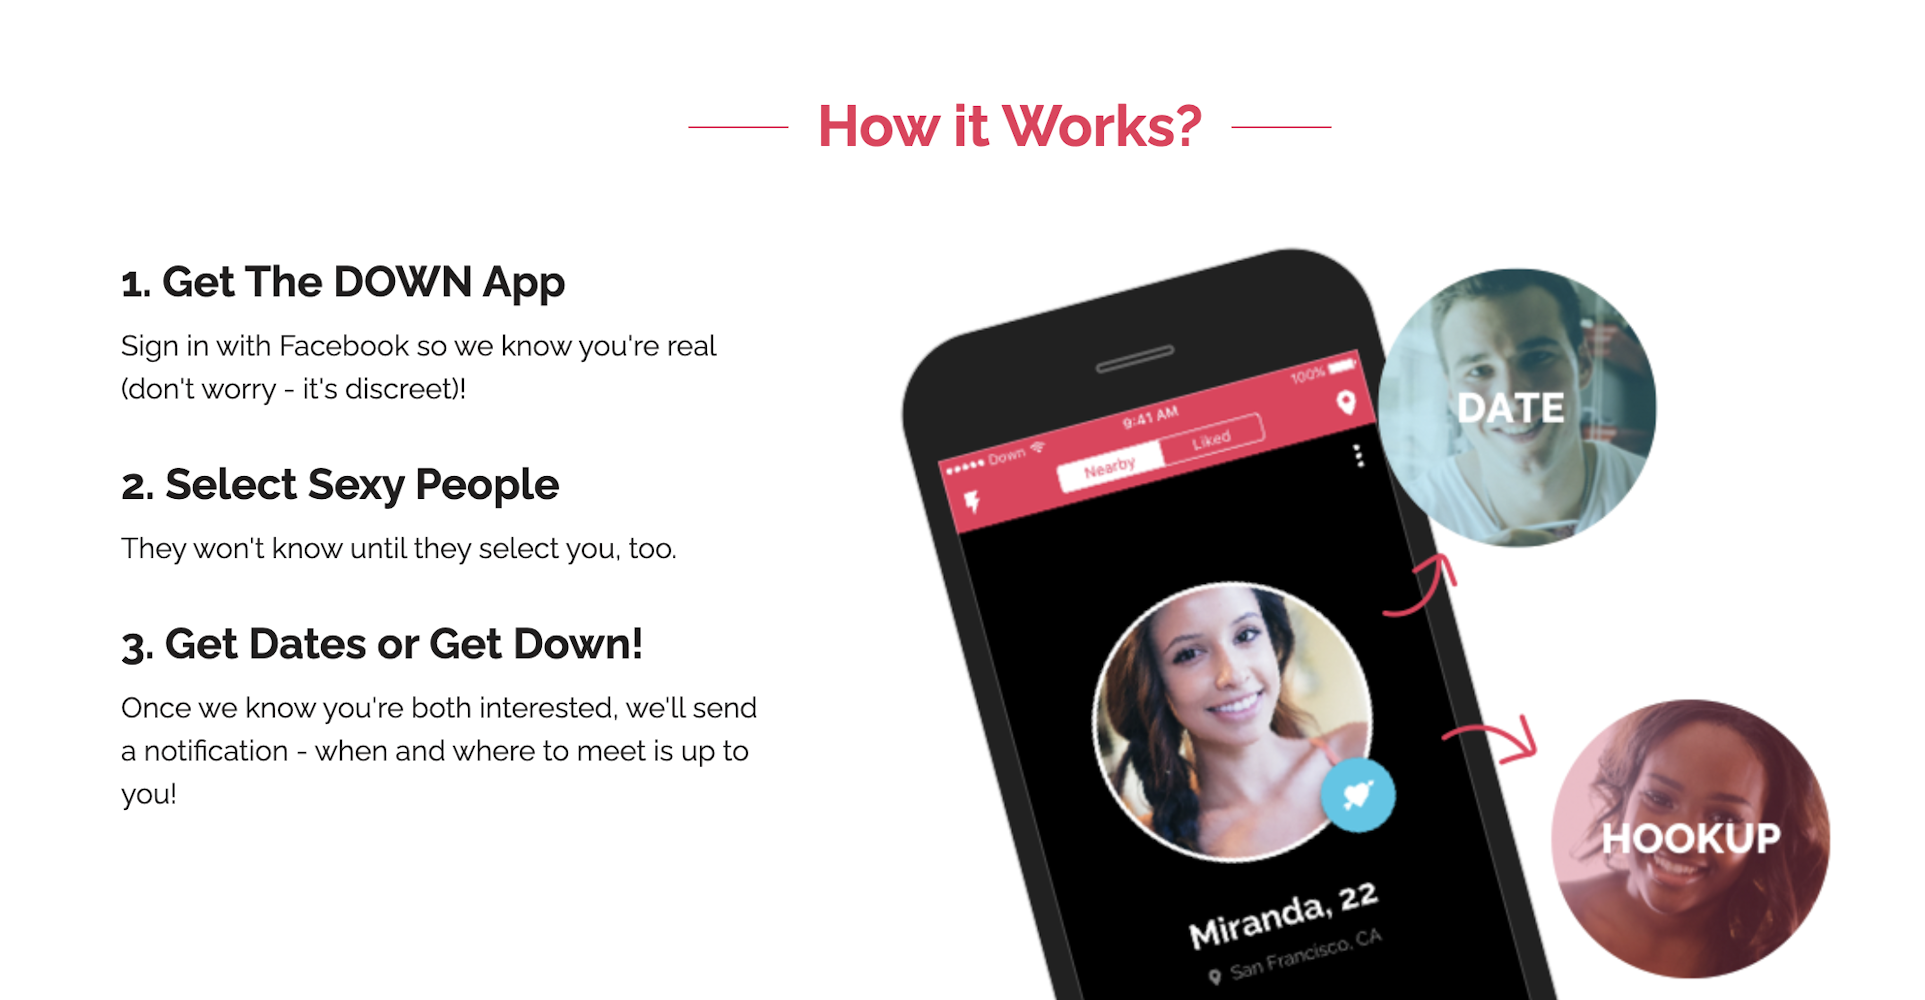 Screenshot of DOWN dating instructions. Shows phone swiping up on a profile they want to date and down on a profile they want to hookup with